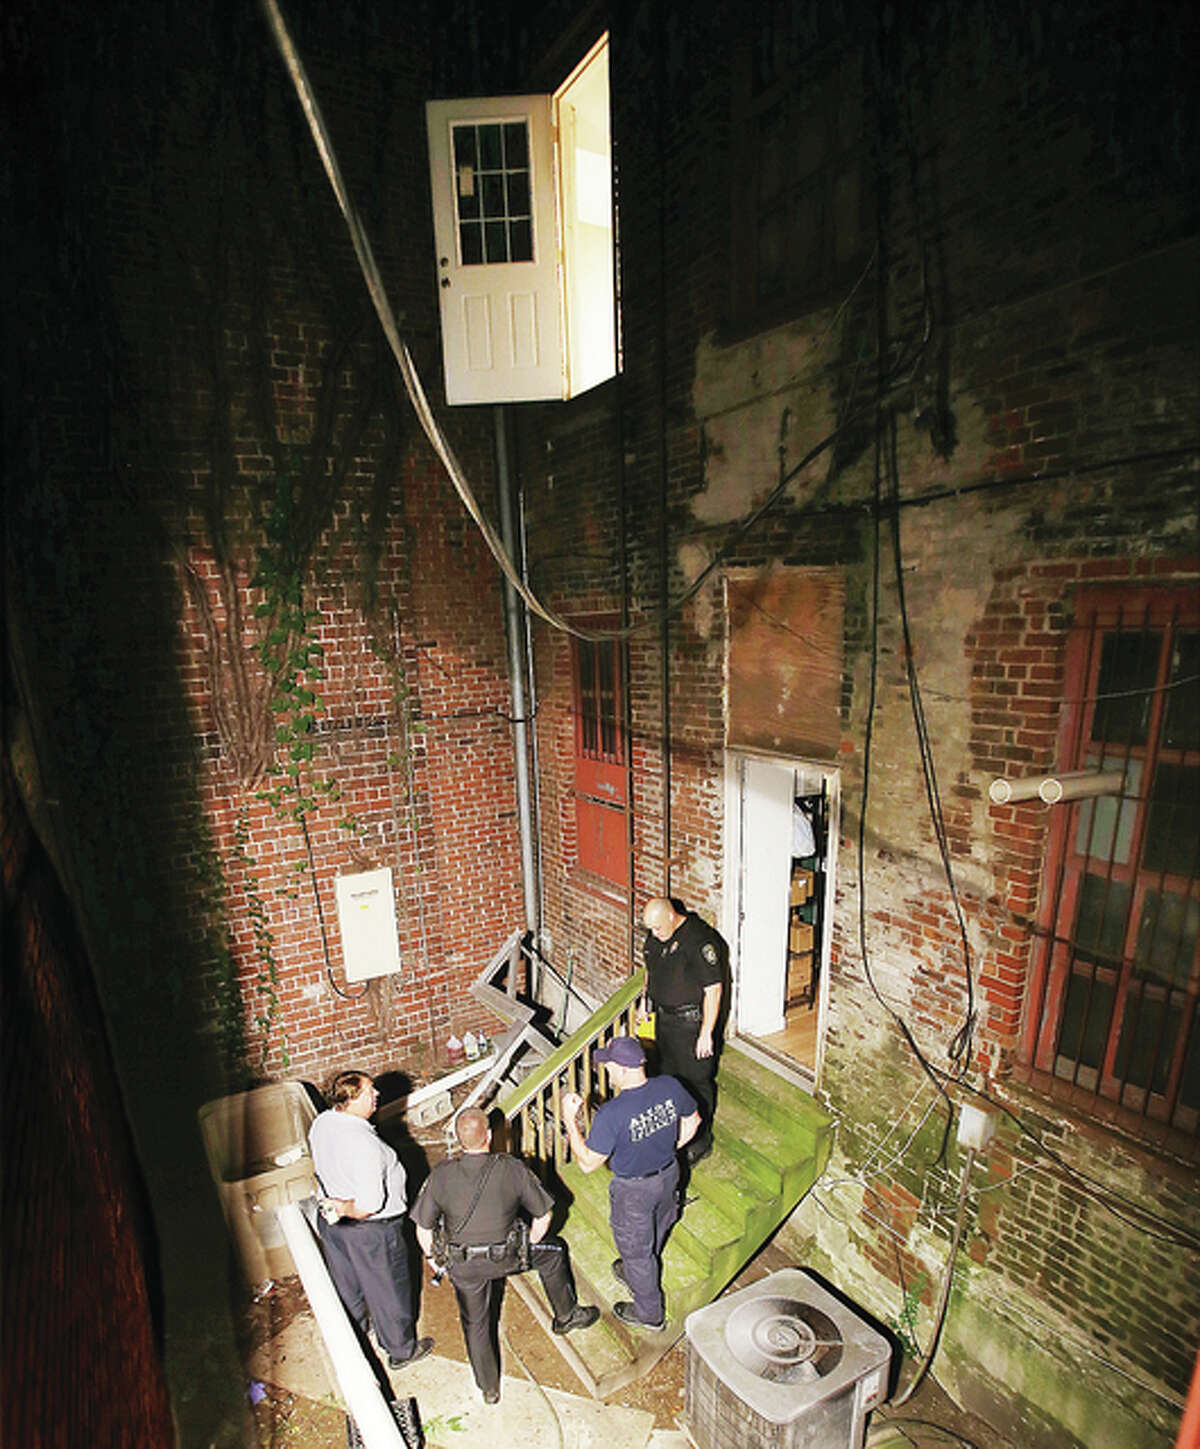 Alton police and fire department officials gather behind the Olive Oil Marketplace at 108 W. Third St. in Alton where a metal fire escape platform, with three people on it, collapsed after coming loose from the brick wall, above, late Sunday night injuring the three people. Two were transported to OSF Saint Anthony’s Medical Center in Alton, where one victim was flown by helicopter ambulance to a St. Louis trauma center. Russ Smith, who owns other buildings in Downtown Alton also owns the building where the accident occurred.